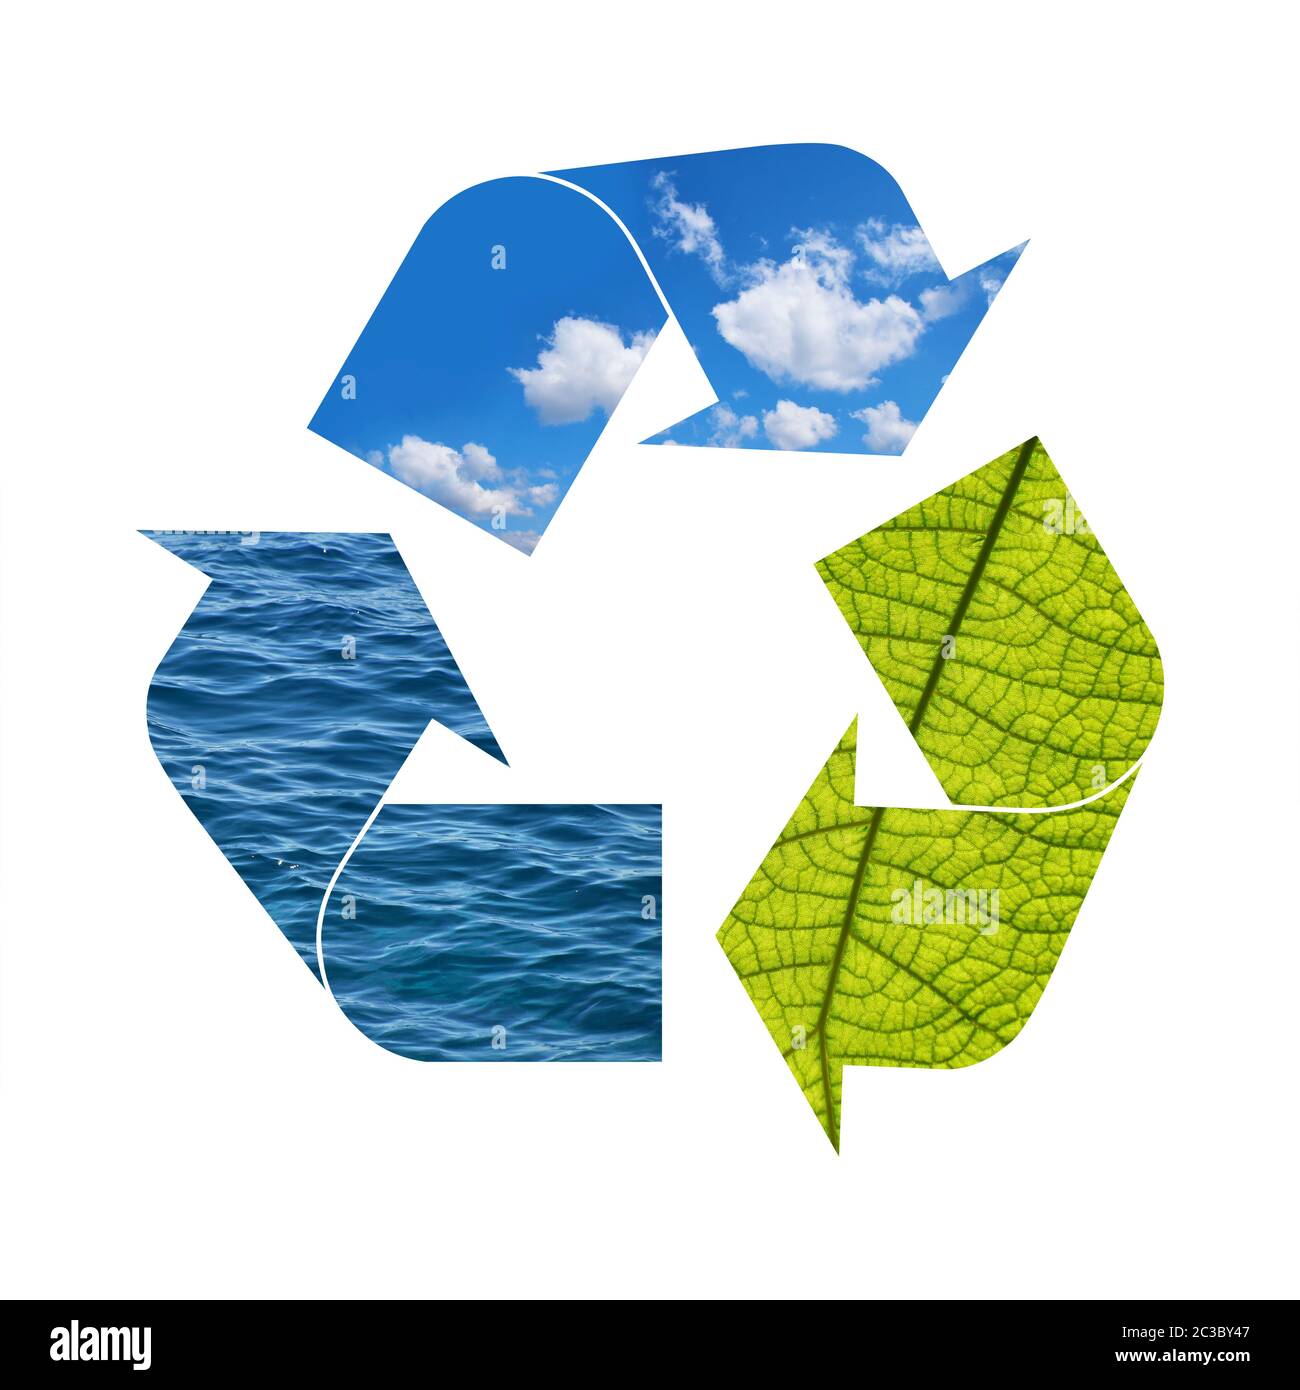 Illustration recycling symbol of nature elements, green foliage, blue sky and sea water isolated on white background Stock Photo